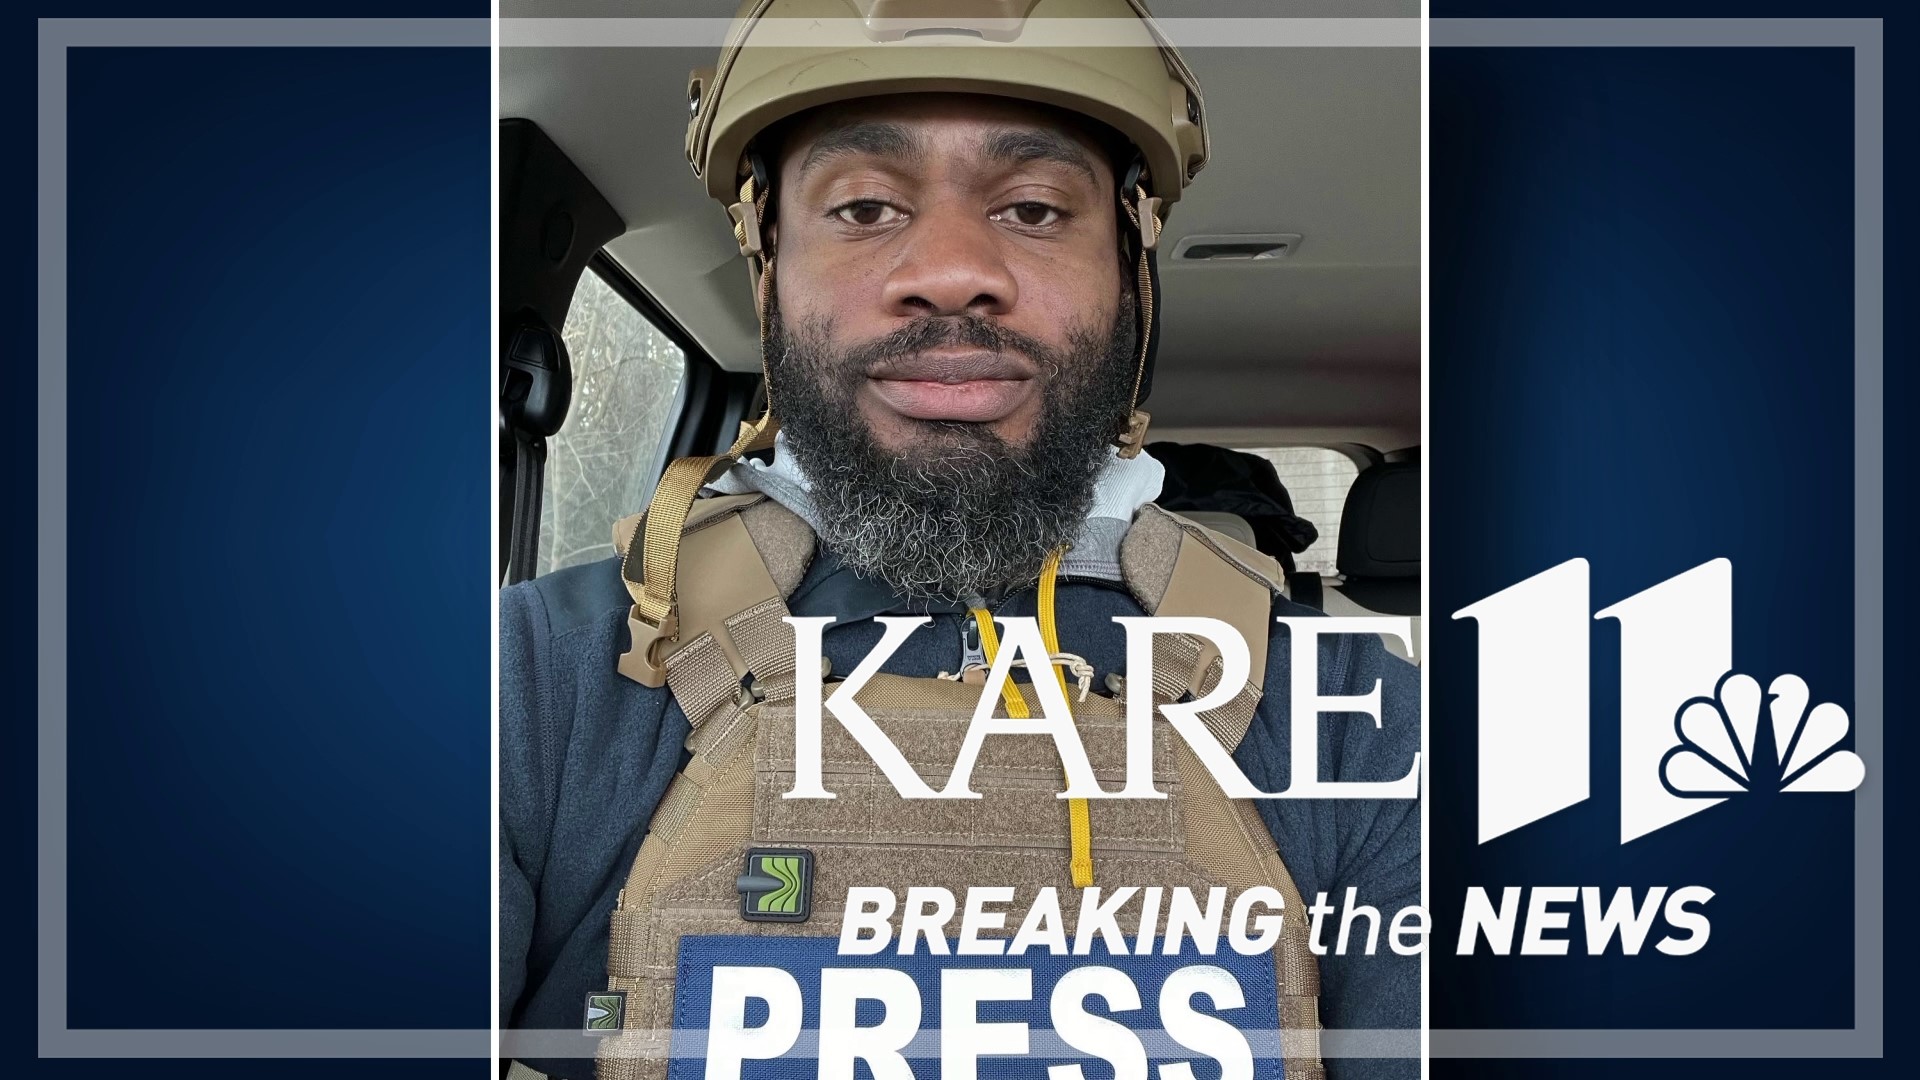 Kent Erdahl talked with journalist Jermaine Starr who is among the few Americans bearing witness to the effects of Russia's war on Ukraine firsthand.